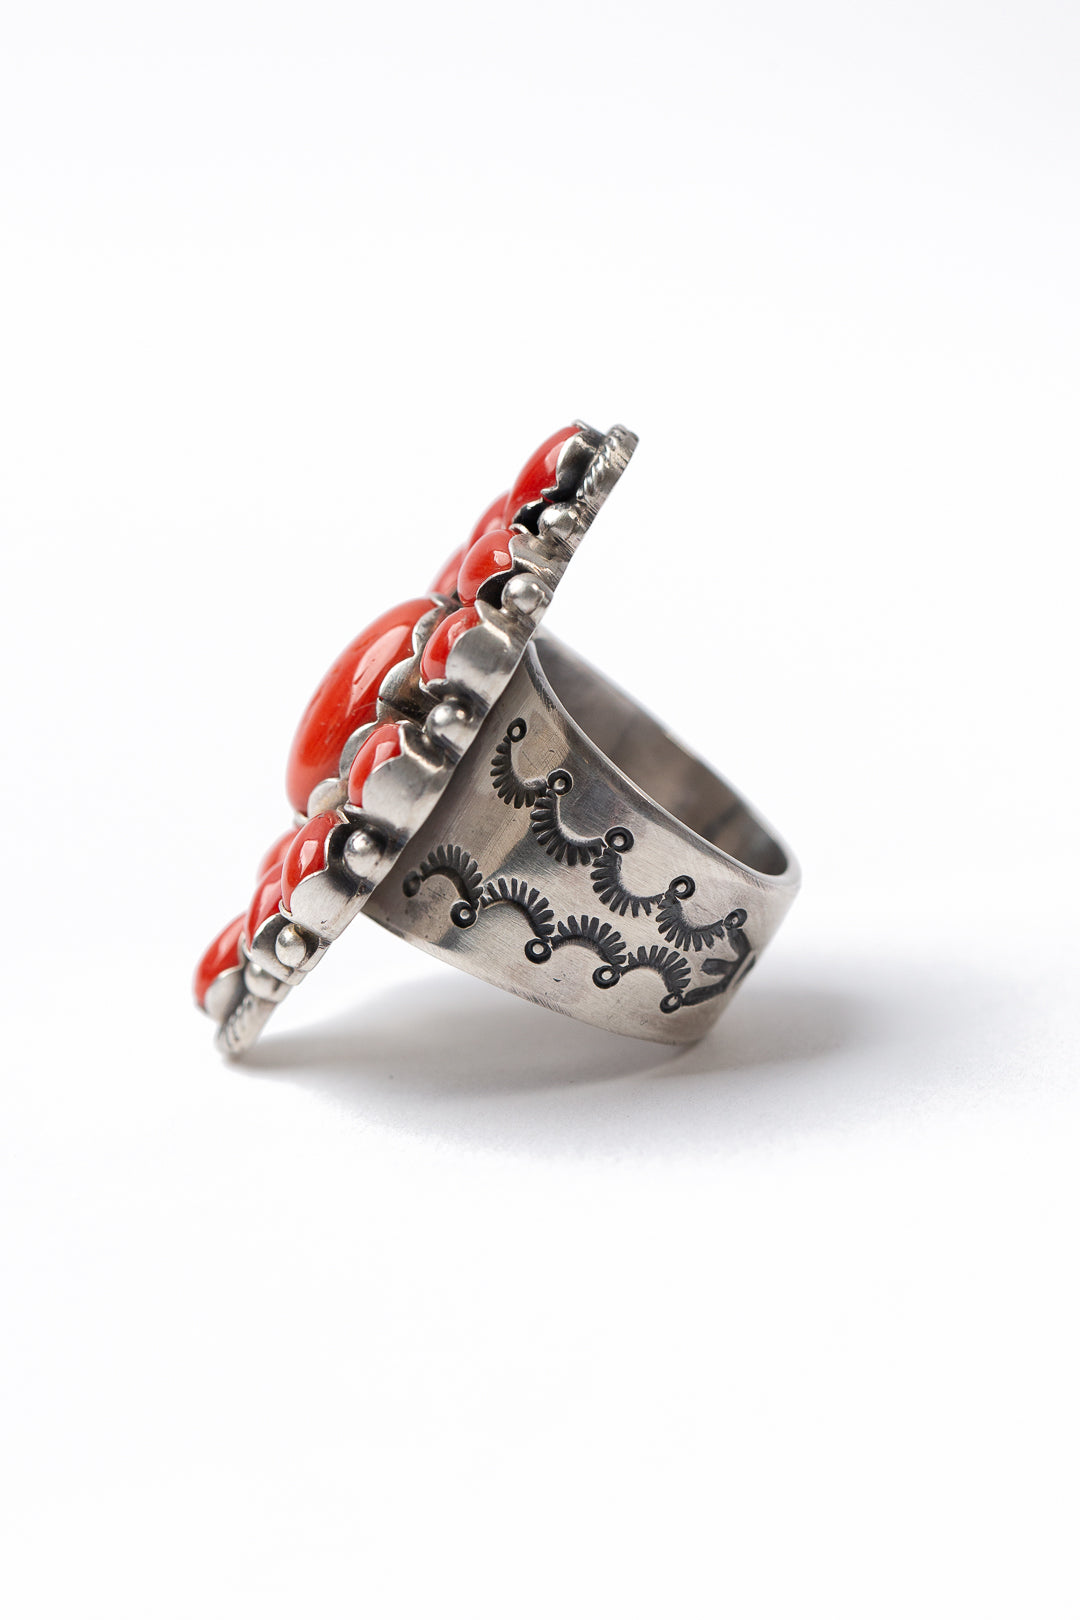 Mark Yazzie Handcrafted Coral Ring